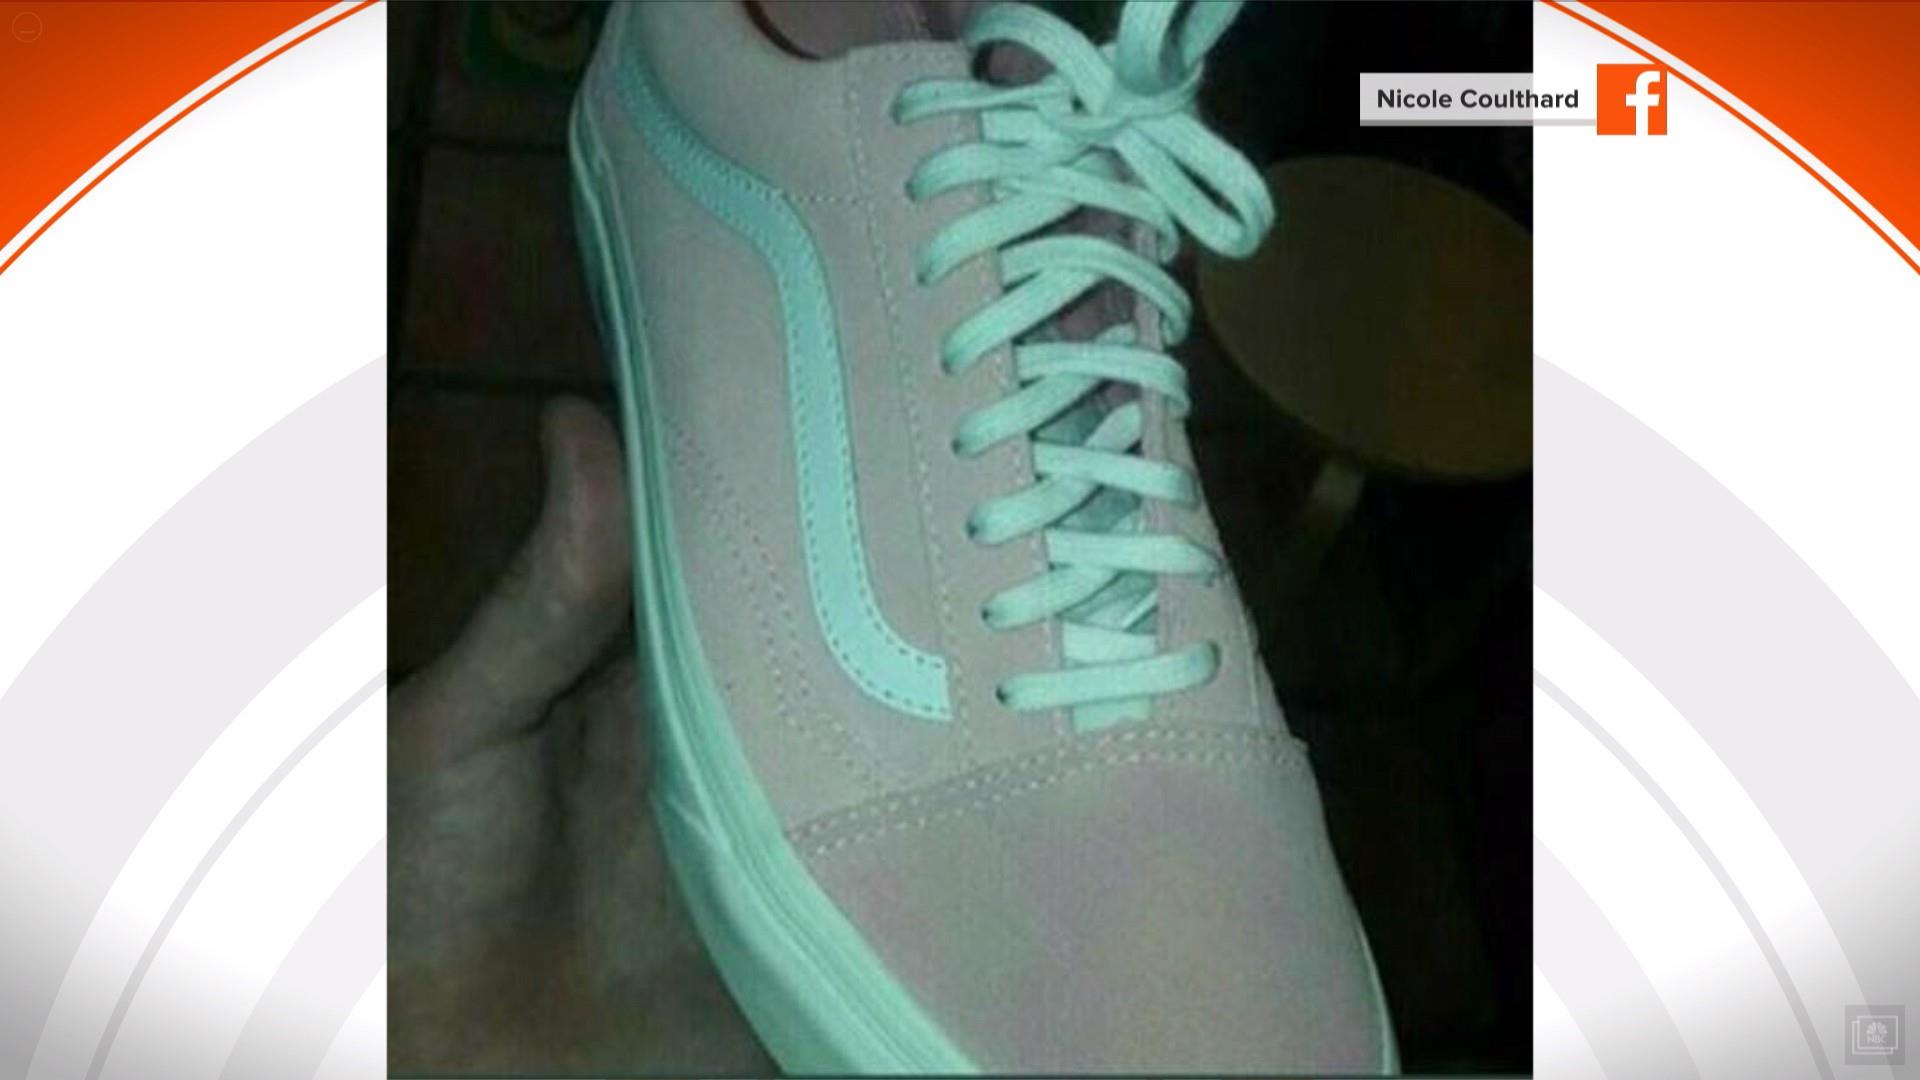 vans shoe pink and white or grey